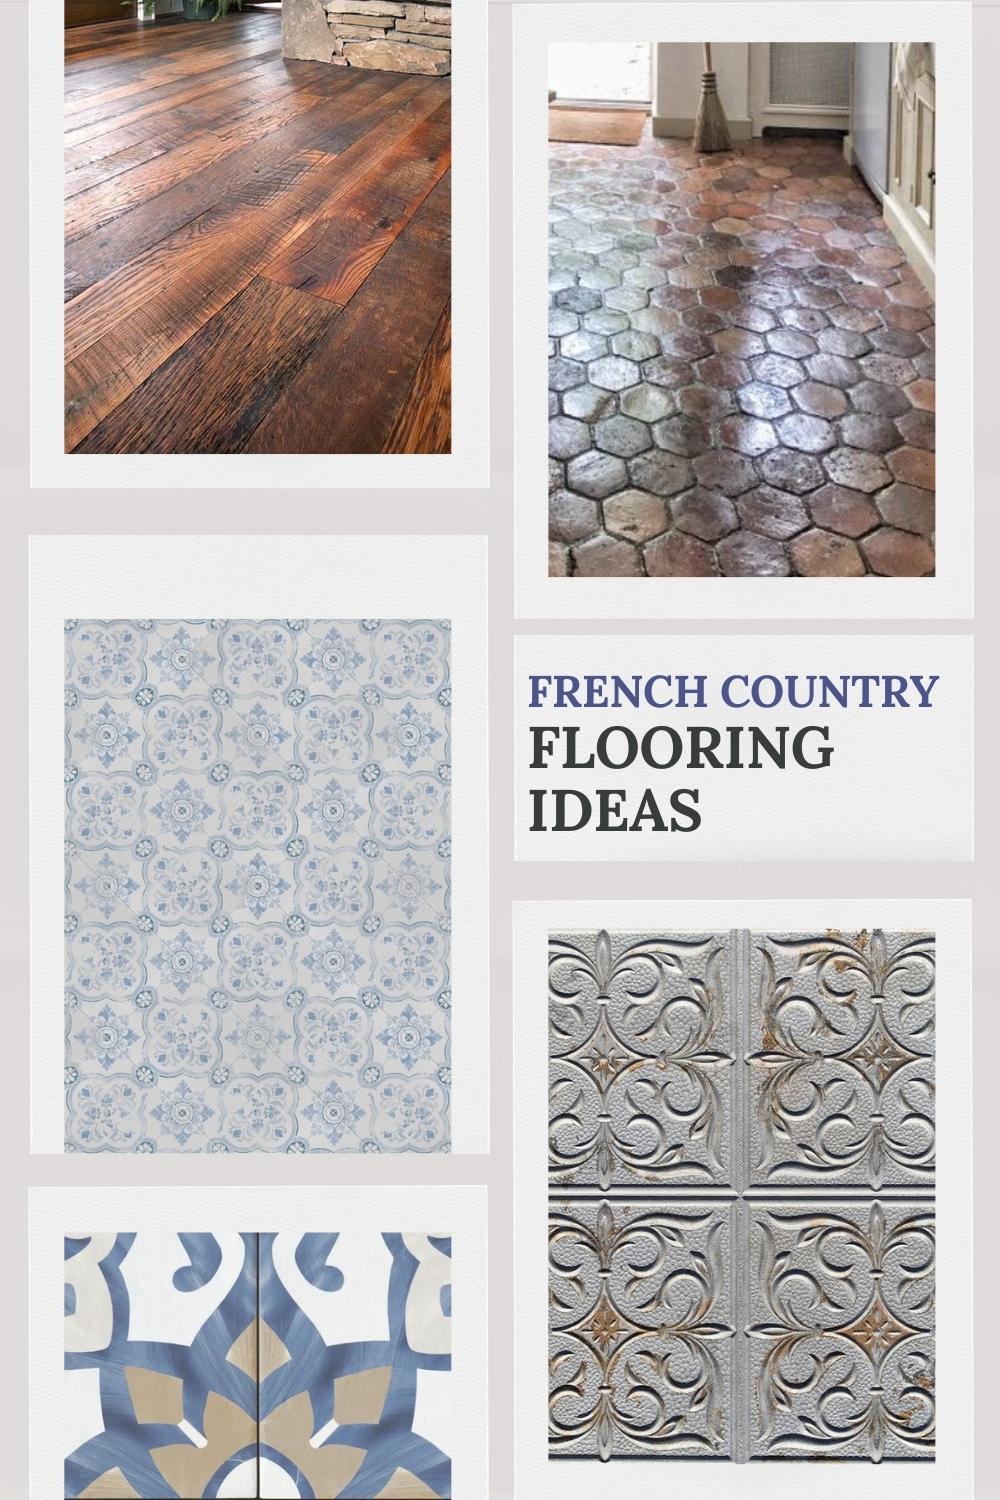 French-Country-flooring-ideas